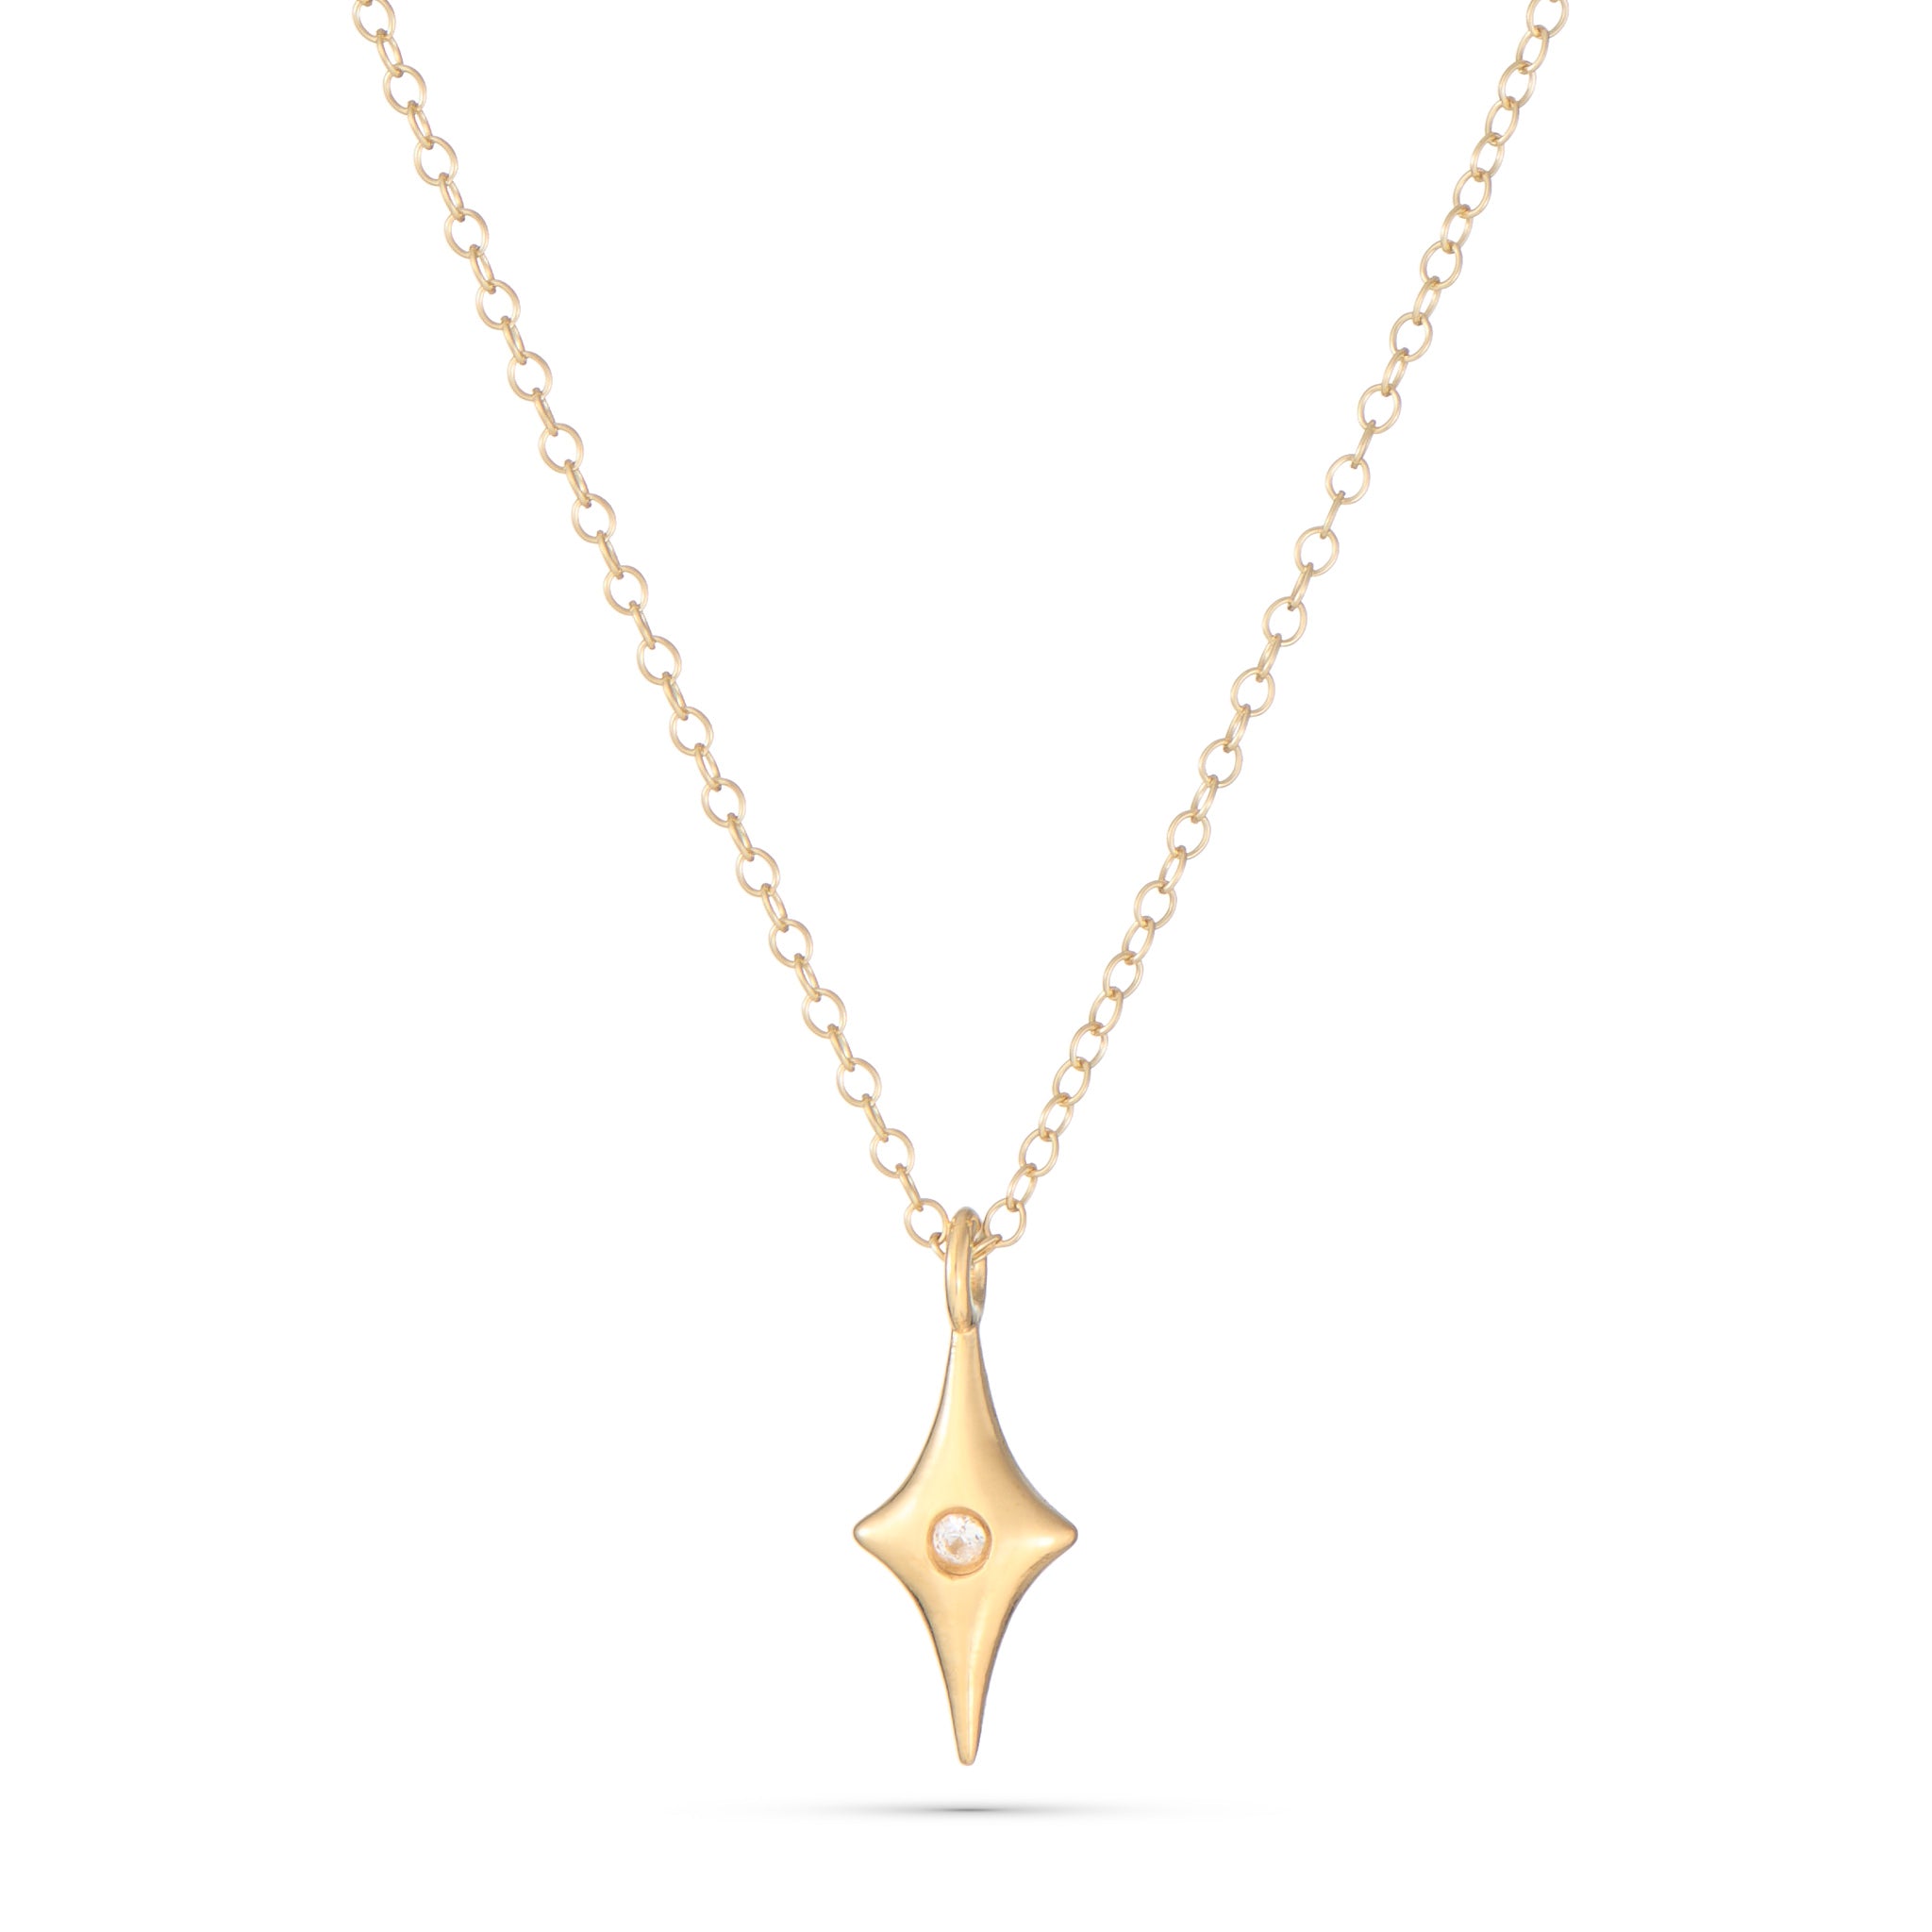 Stardust Necklace - White